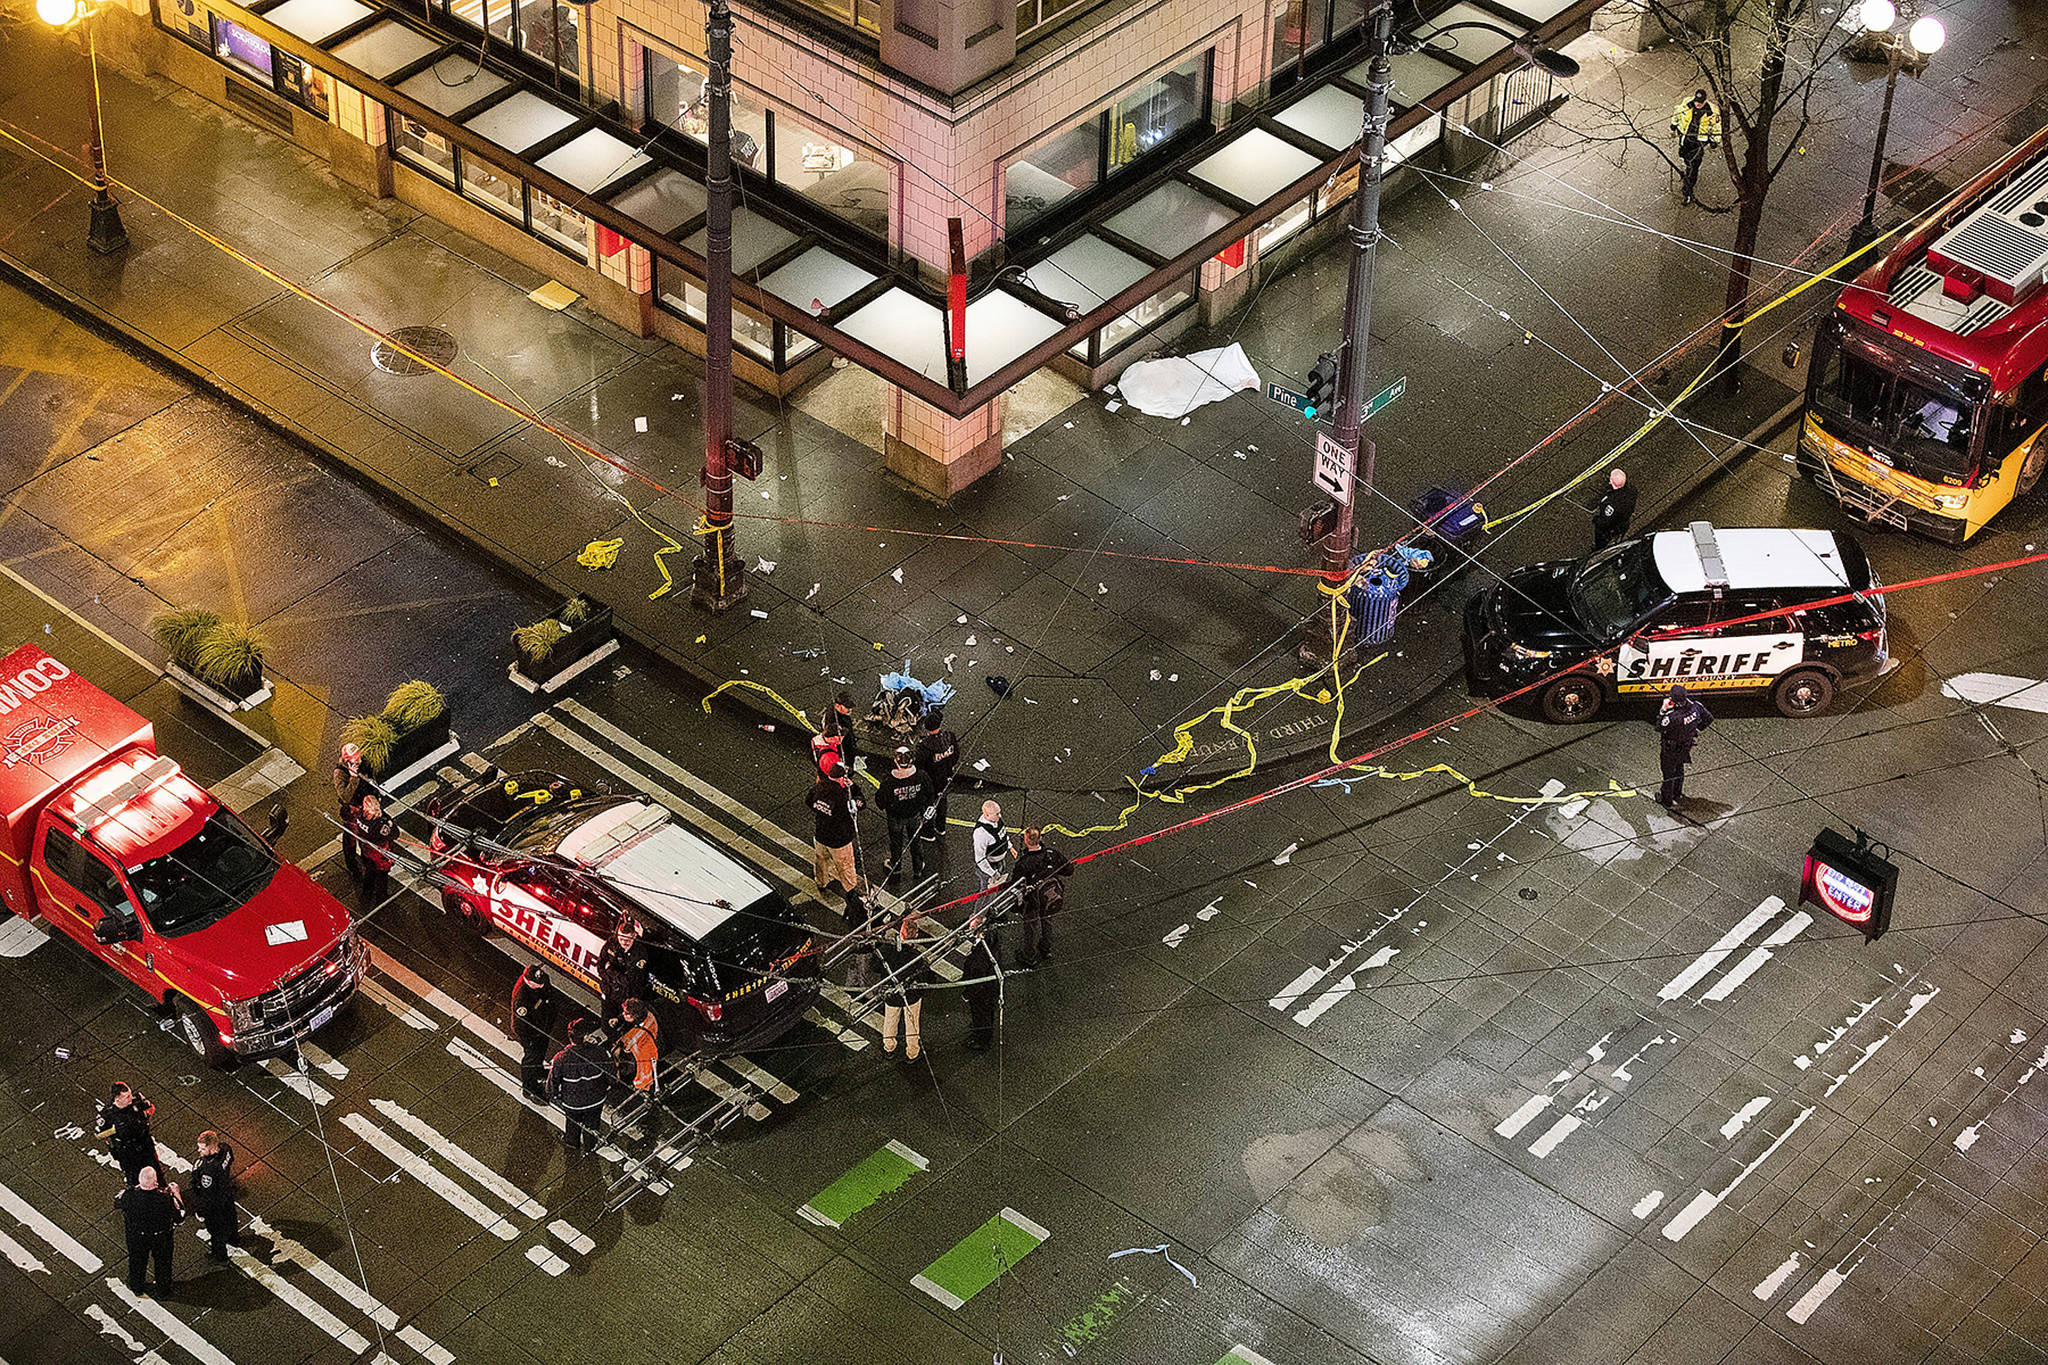 Police work a crime scene after a shooting near 3rd Avenue and Pine Street in downtown Seattle on Wednesday. (Amanda Snyder/The Seattle Times via AP)